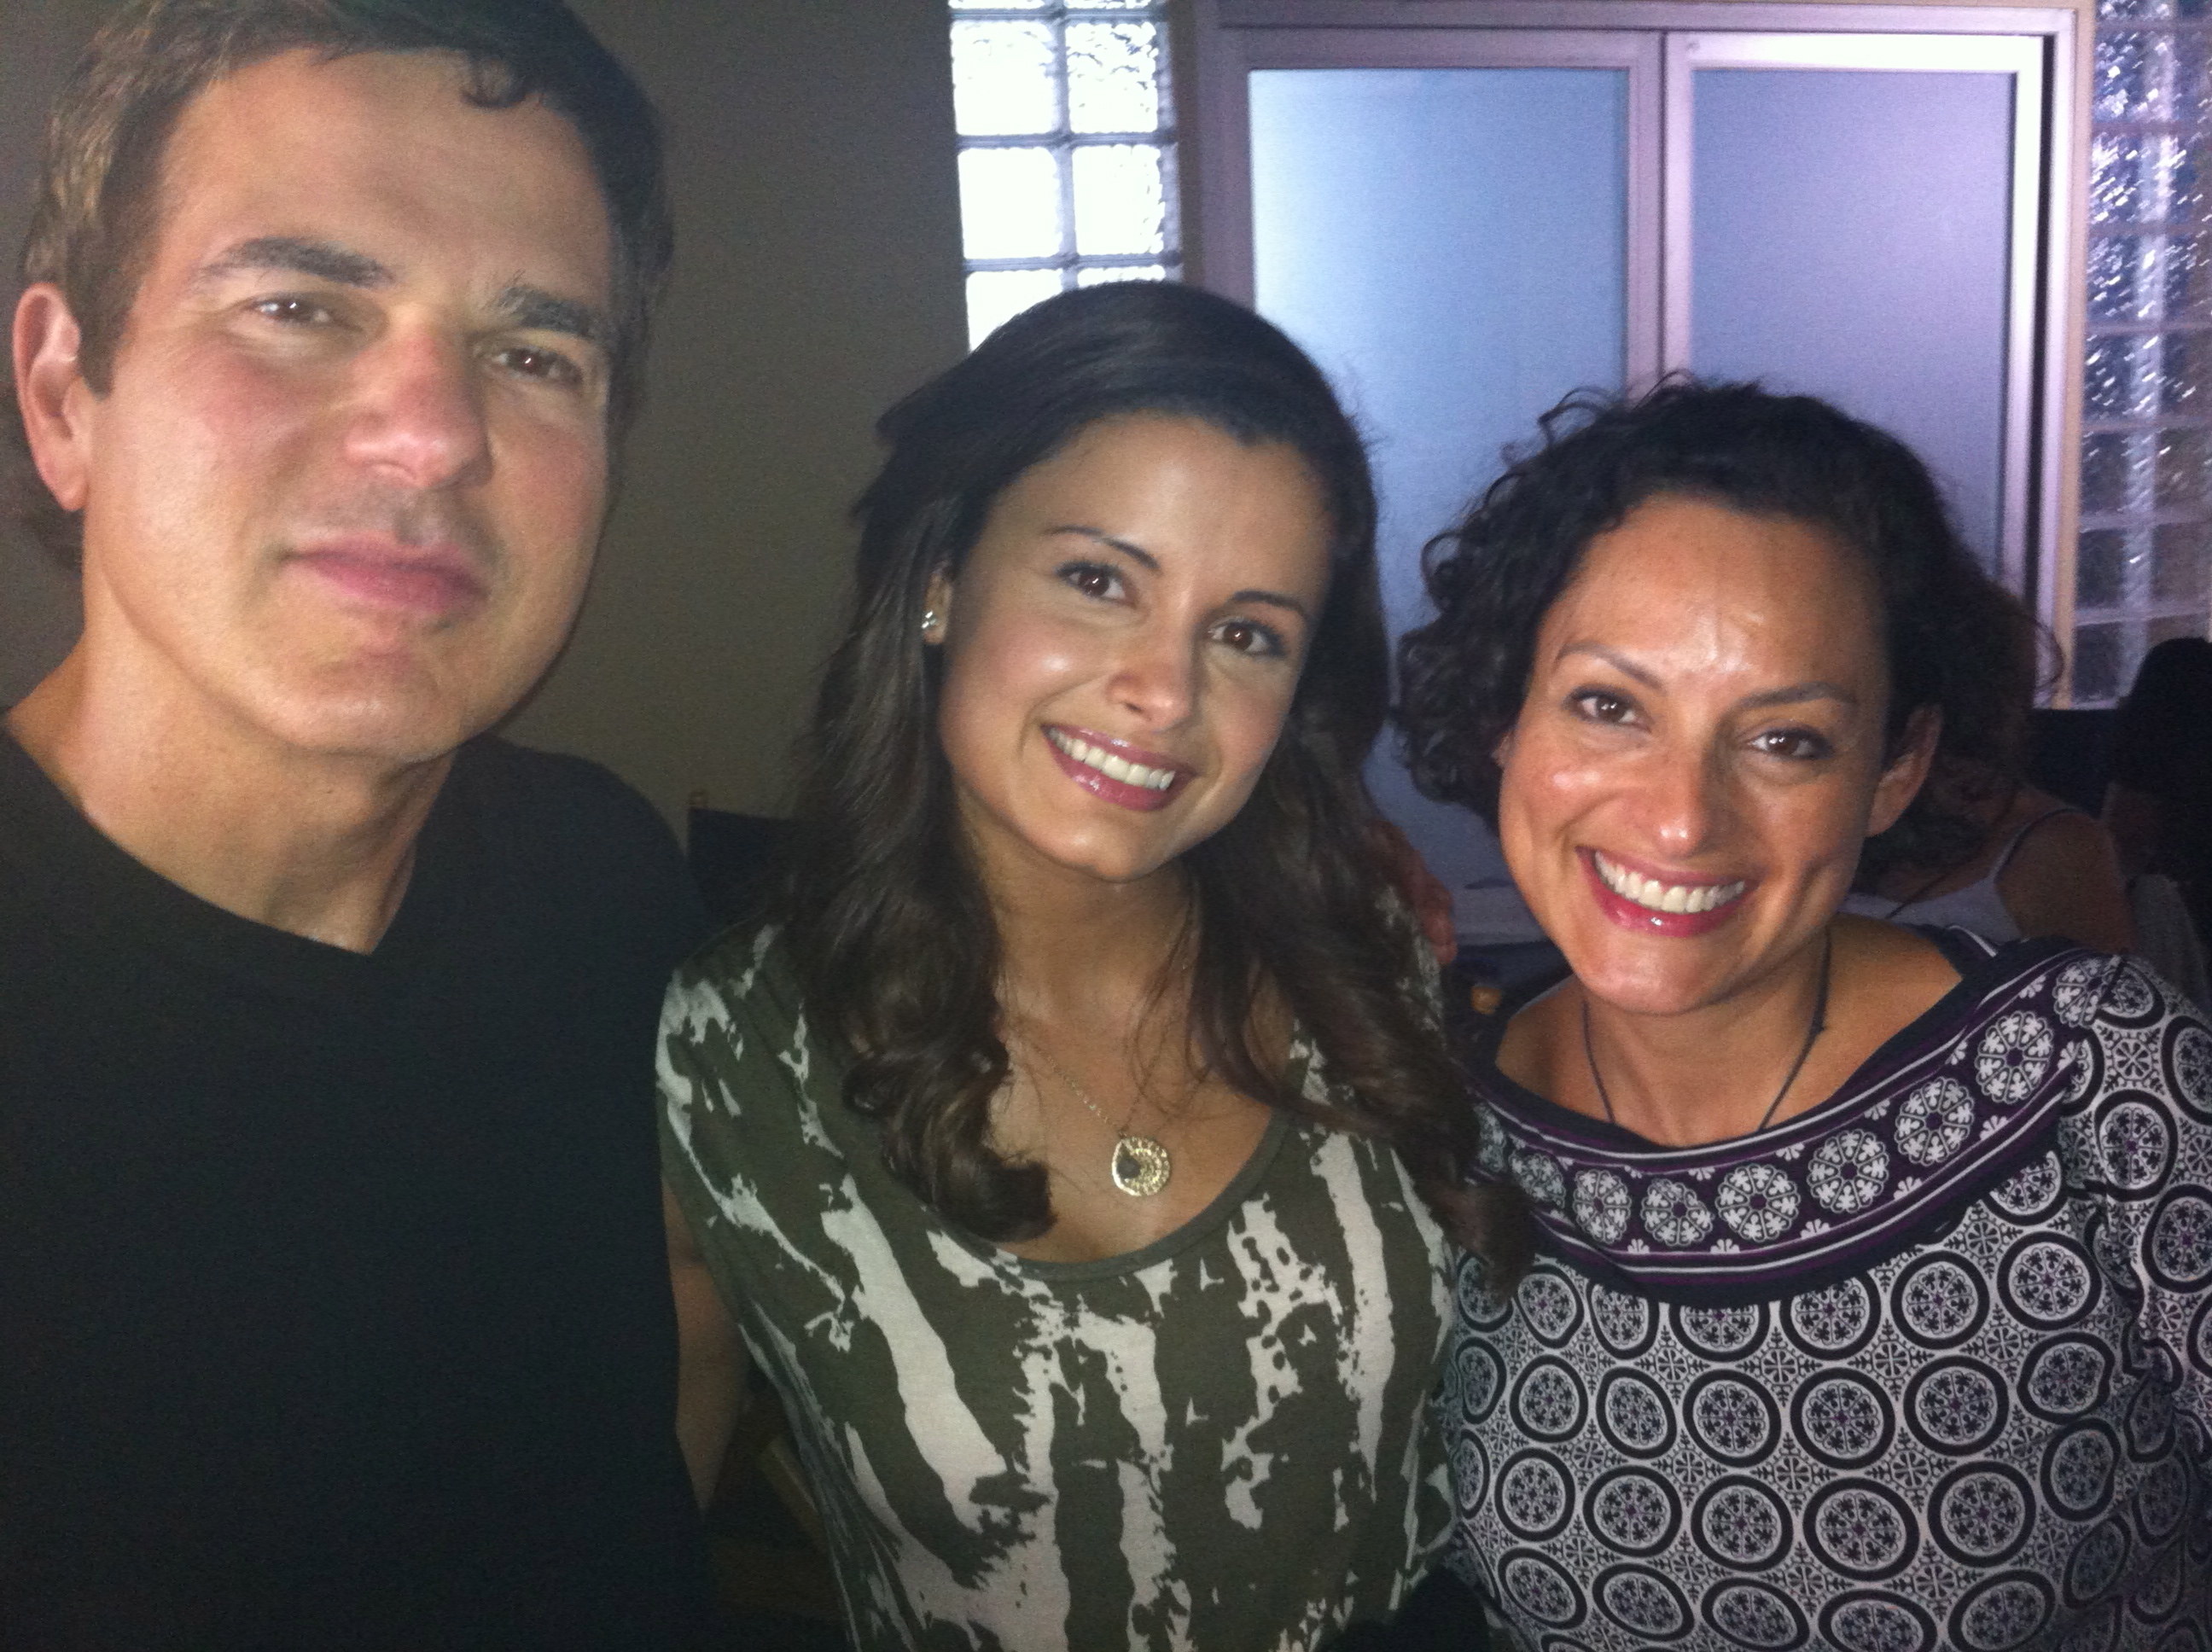 On set of East Los High with Director and writer Carlos Portugal and writer Kathleen Bedoya